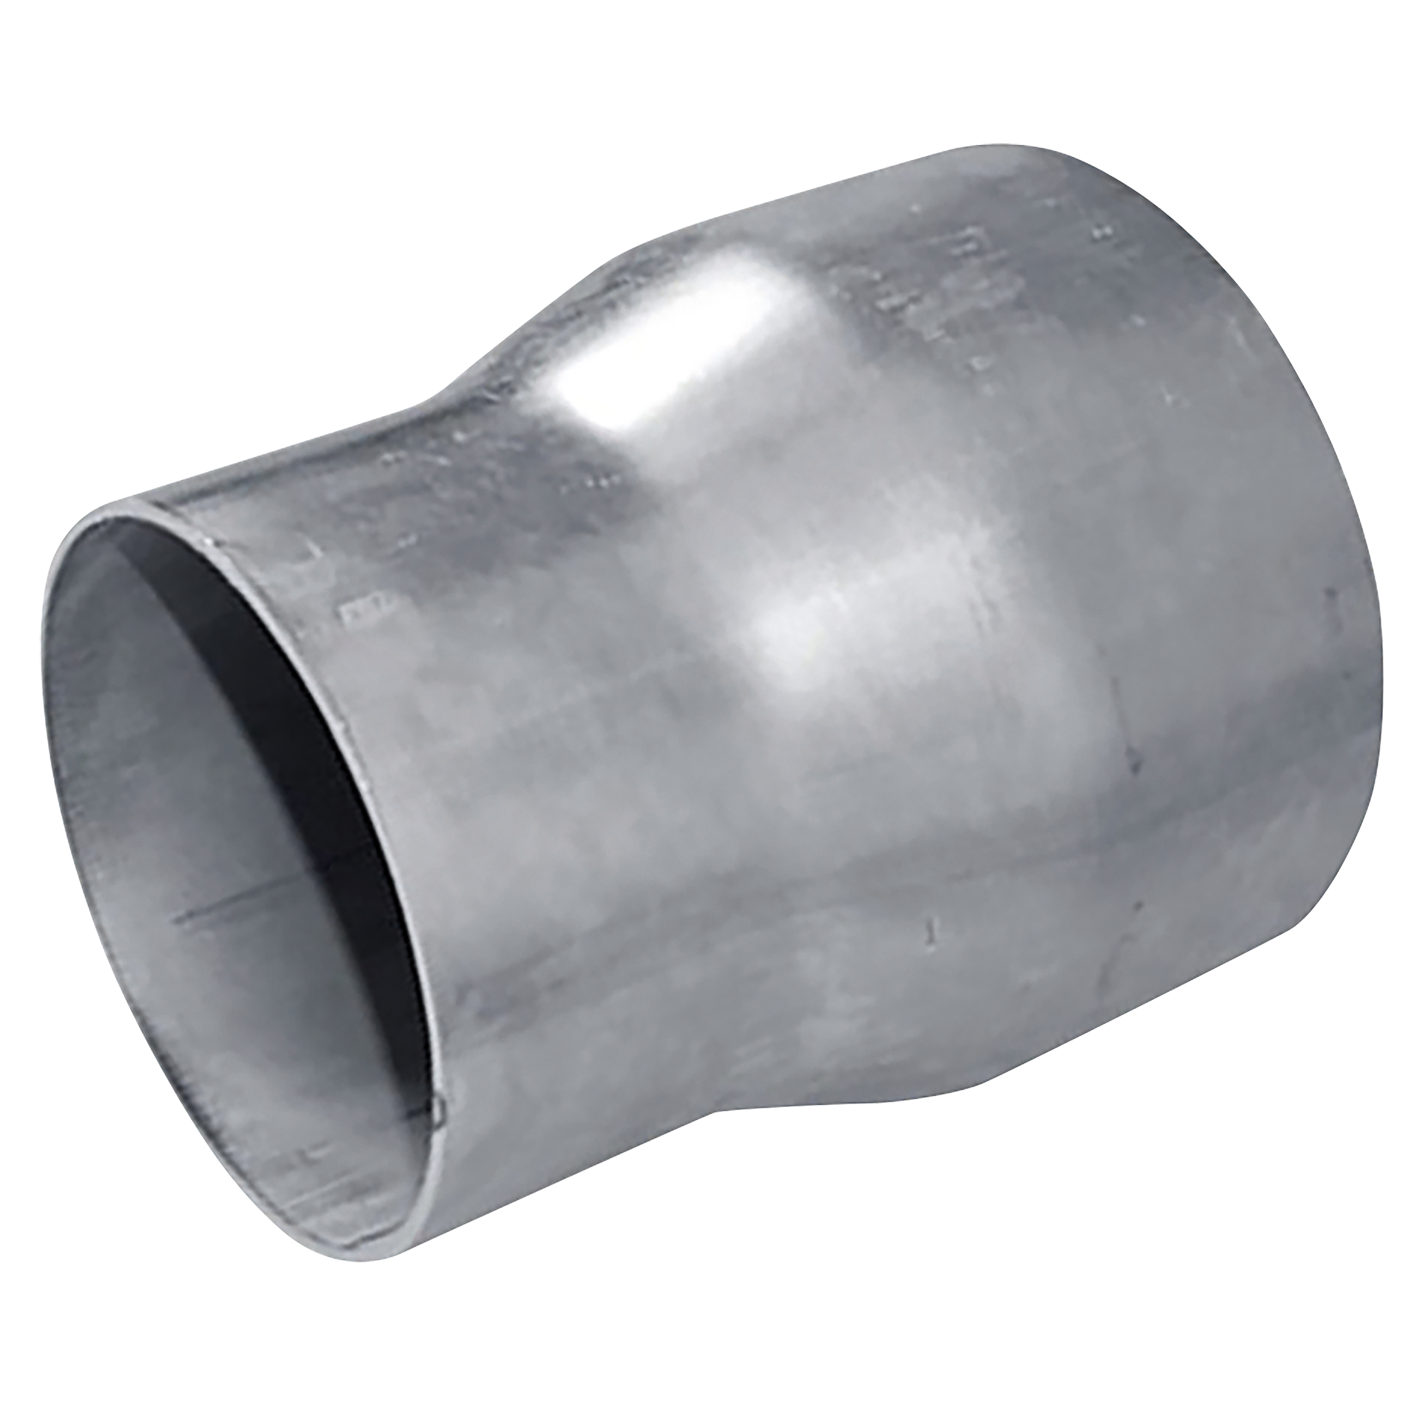 STEEL REDUCING CONE 152MM-102MM OD